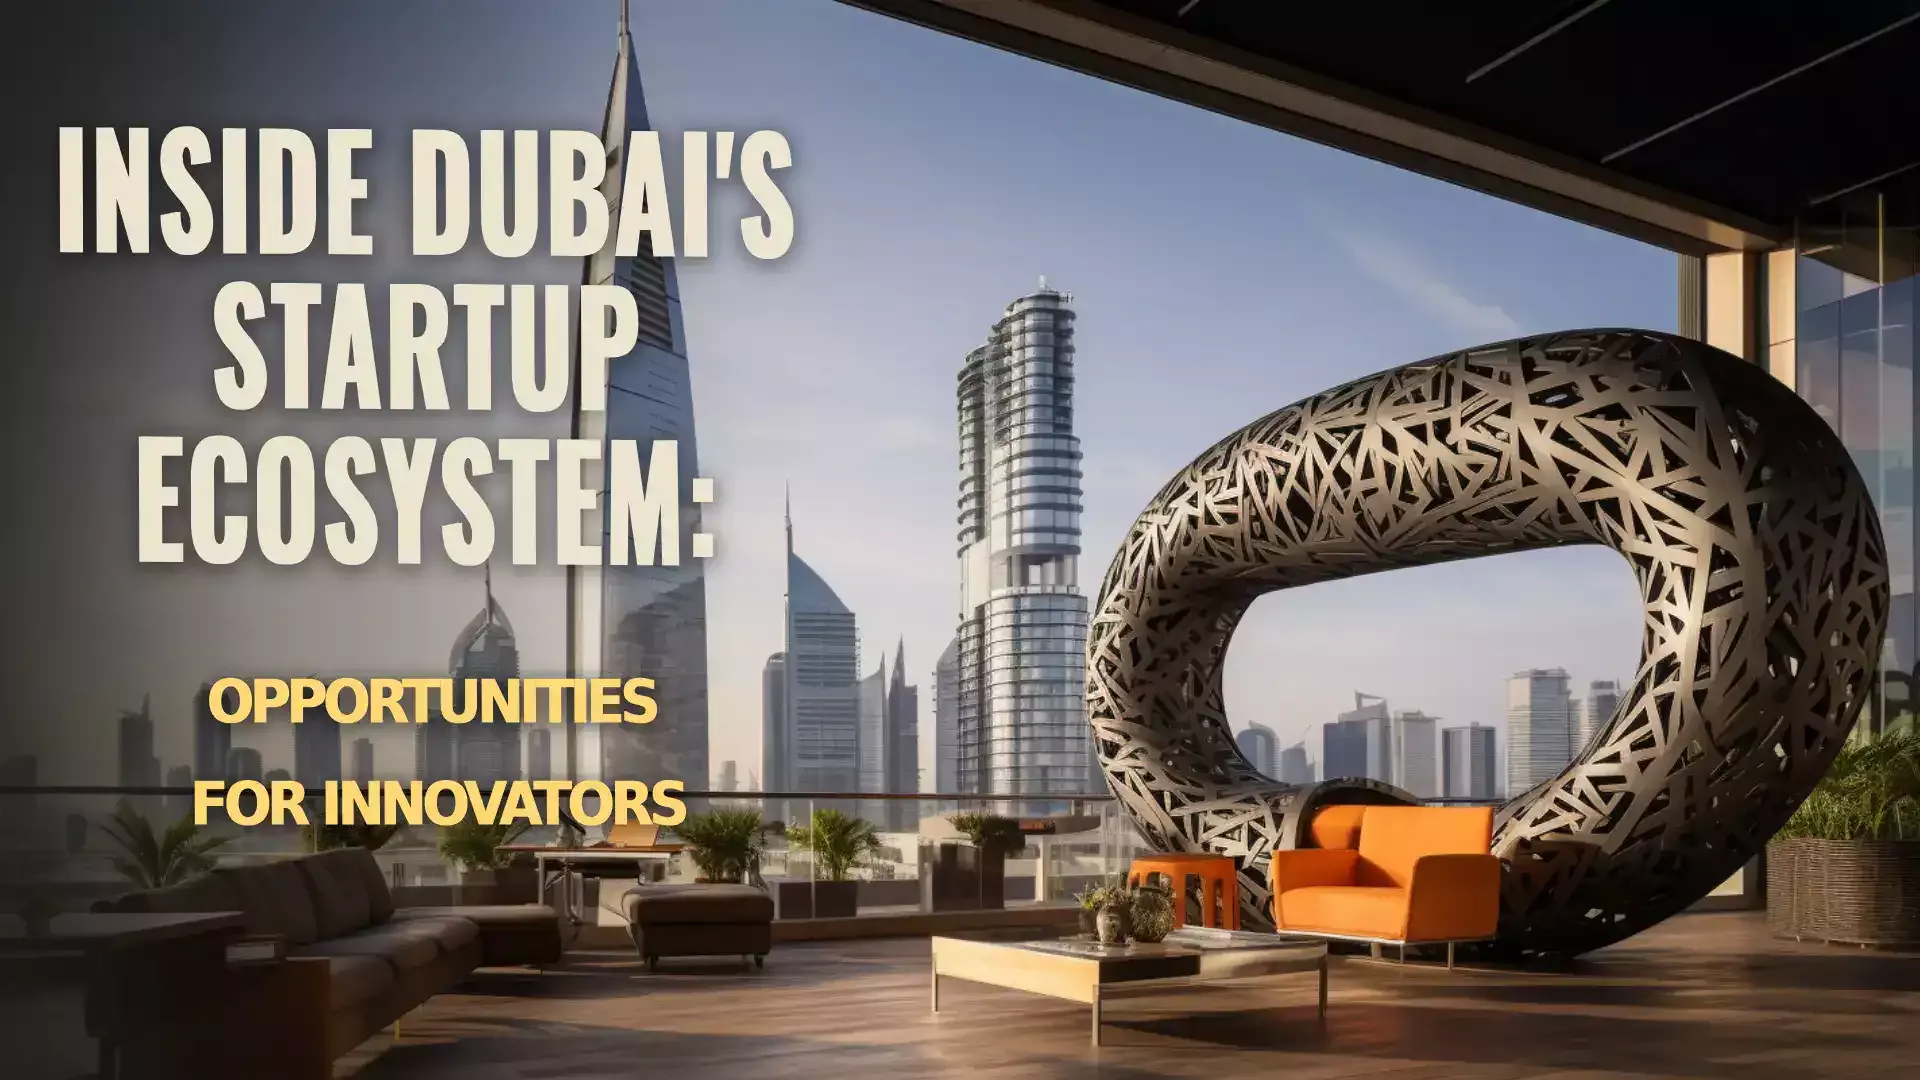 Image depicting business opportunities in Dubai